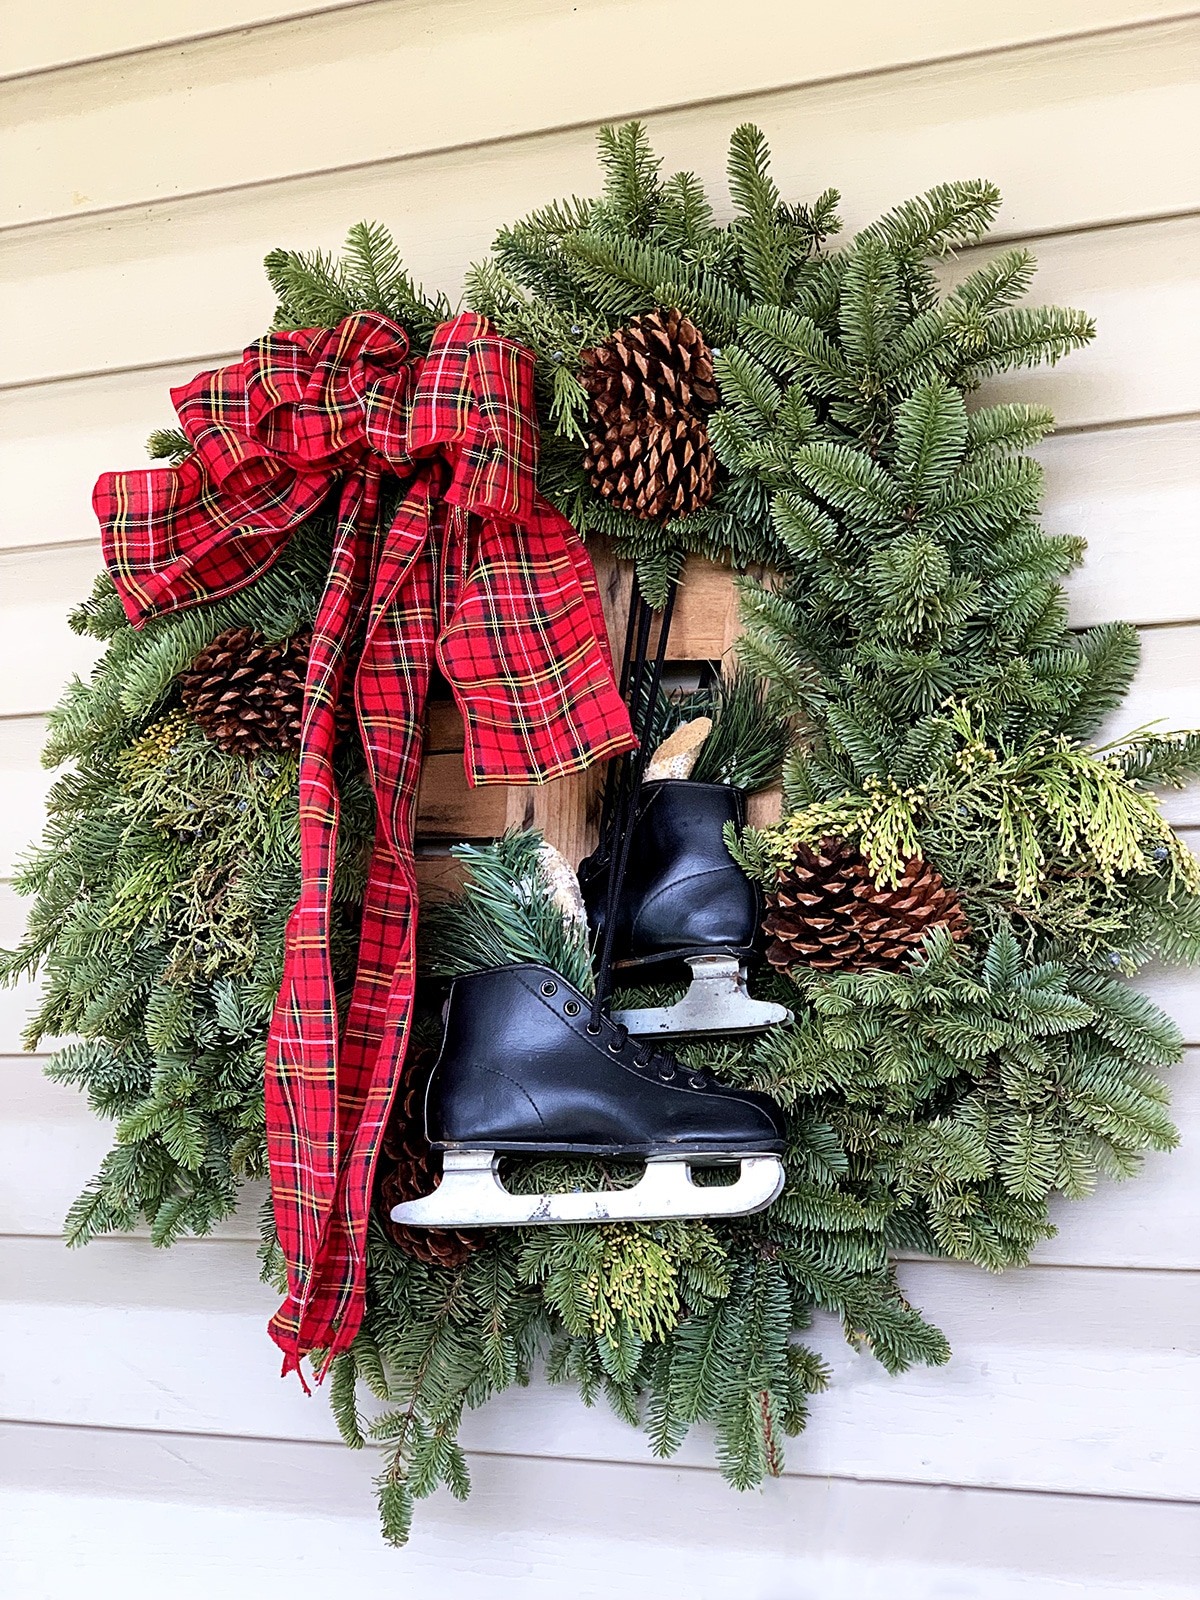 A winter wreath for a Christmas front porch - with pine boughs, pinecones, tartan plaid bow and black ice skates.